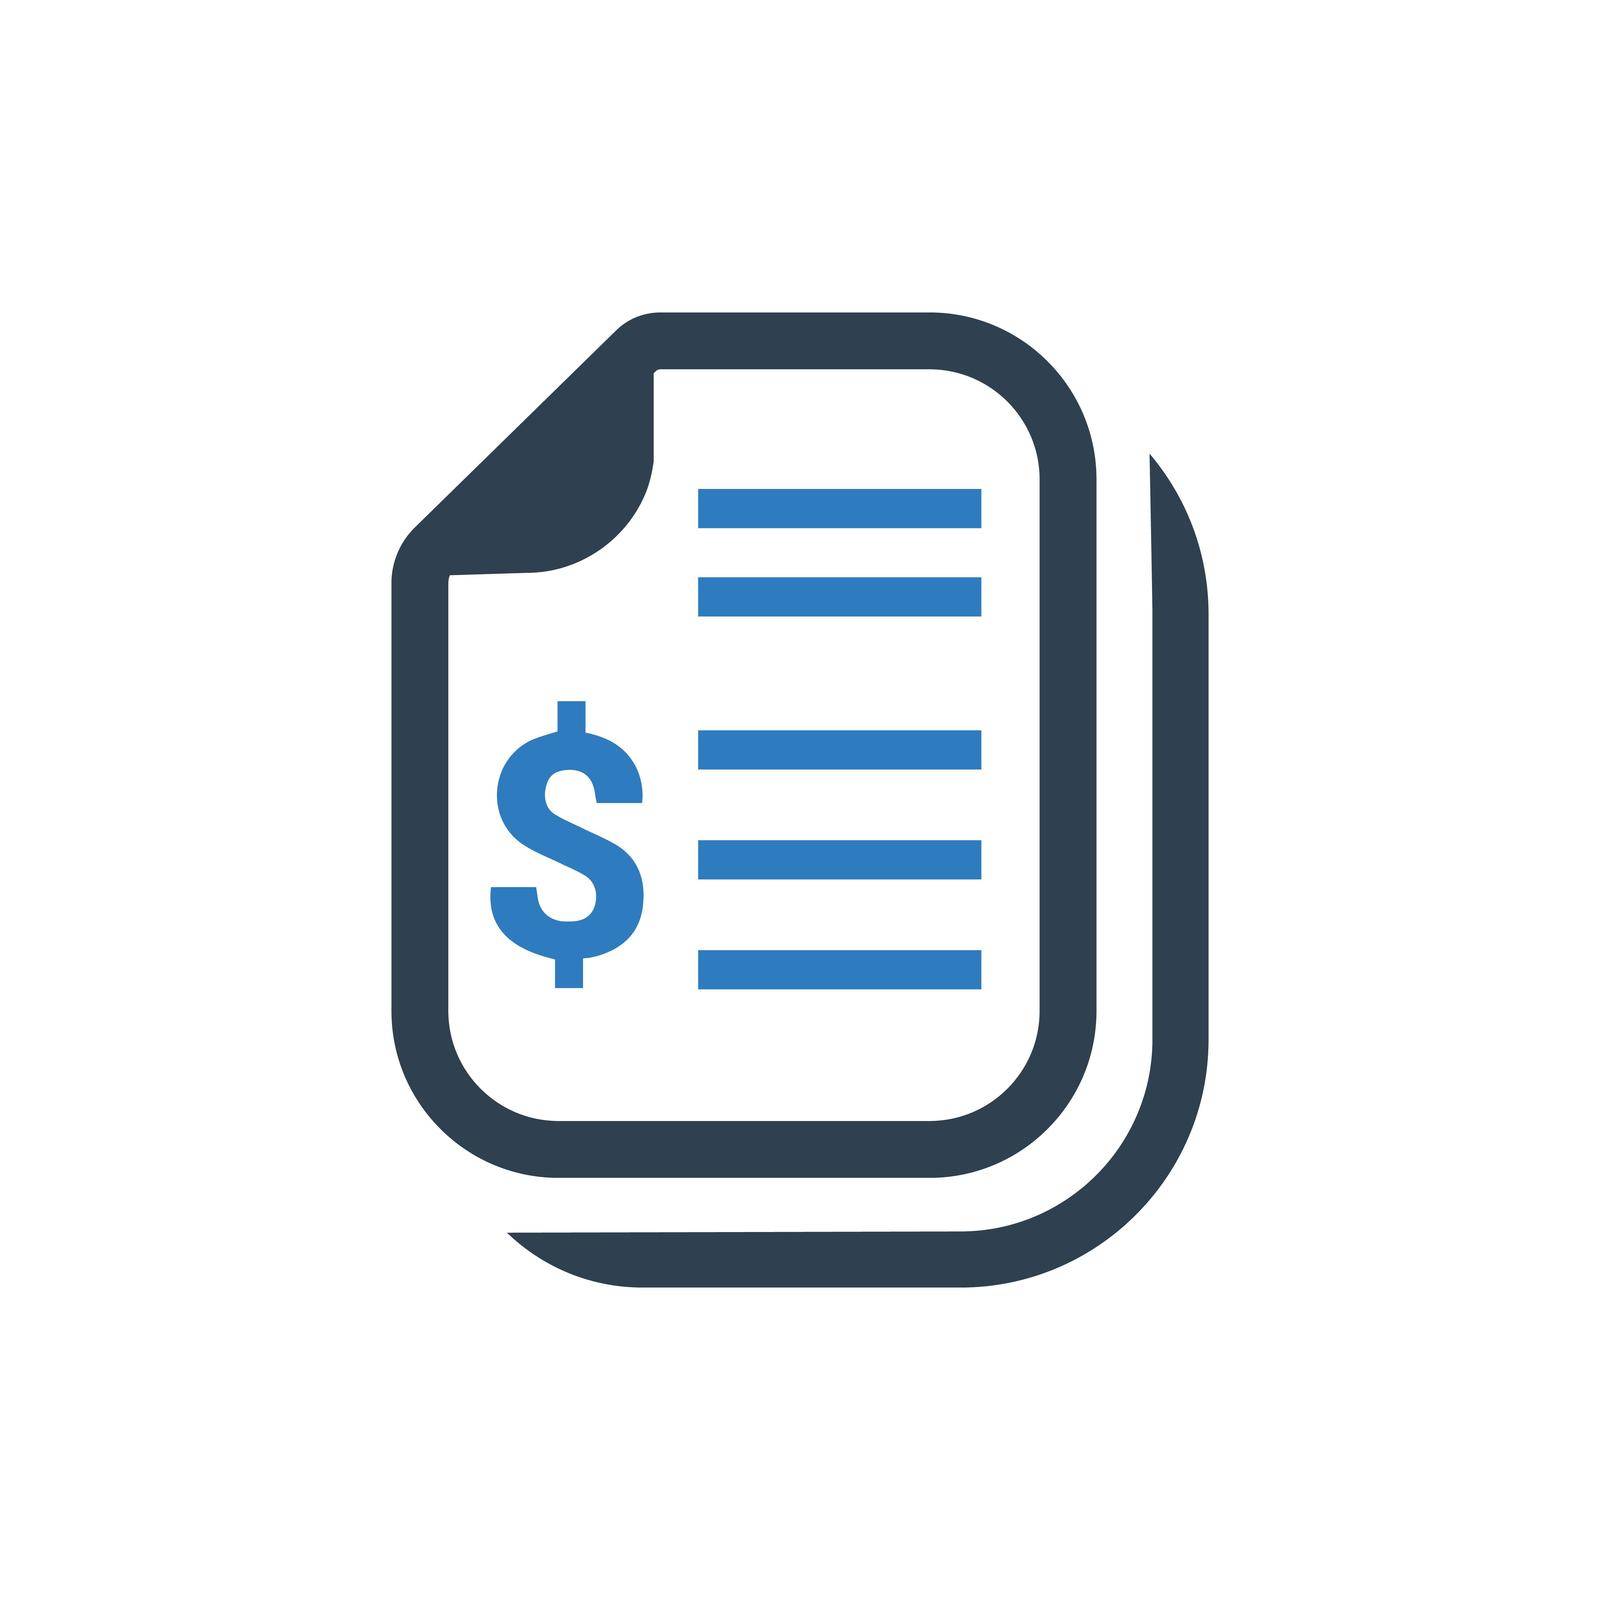 Financial Statement icon. Vector EPS file.